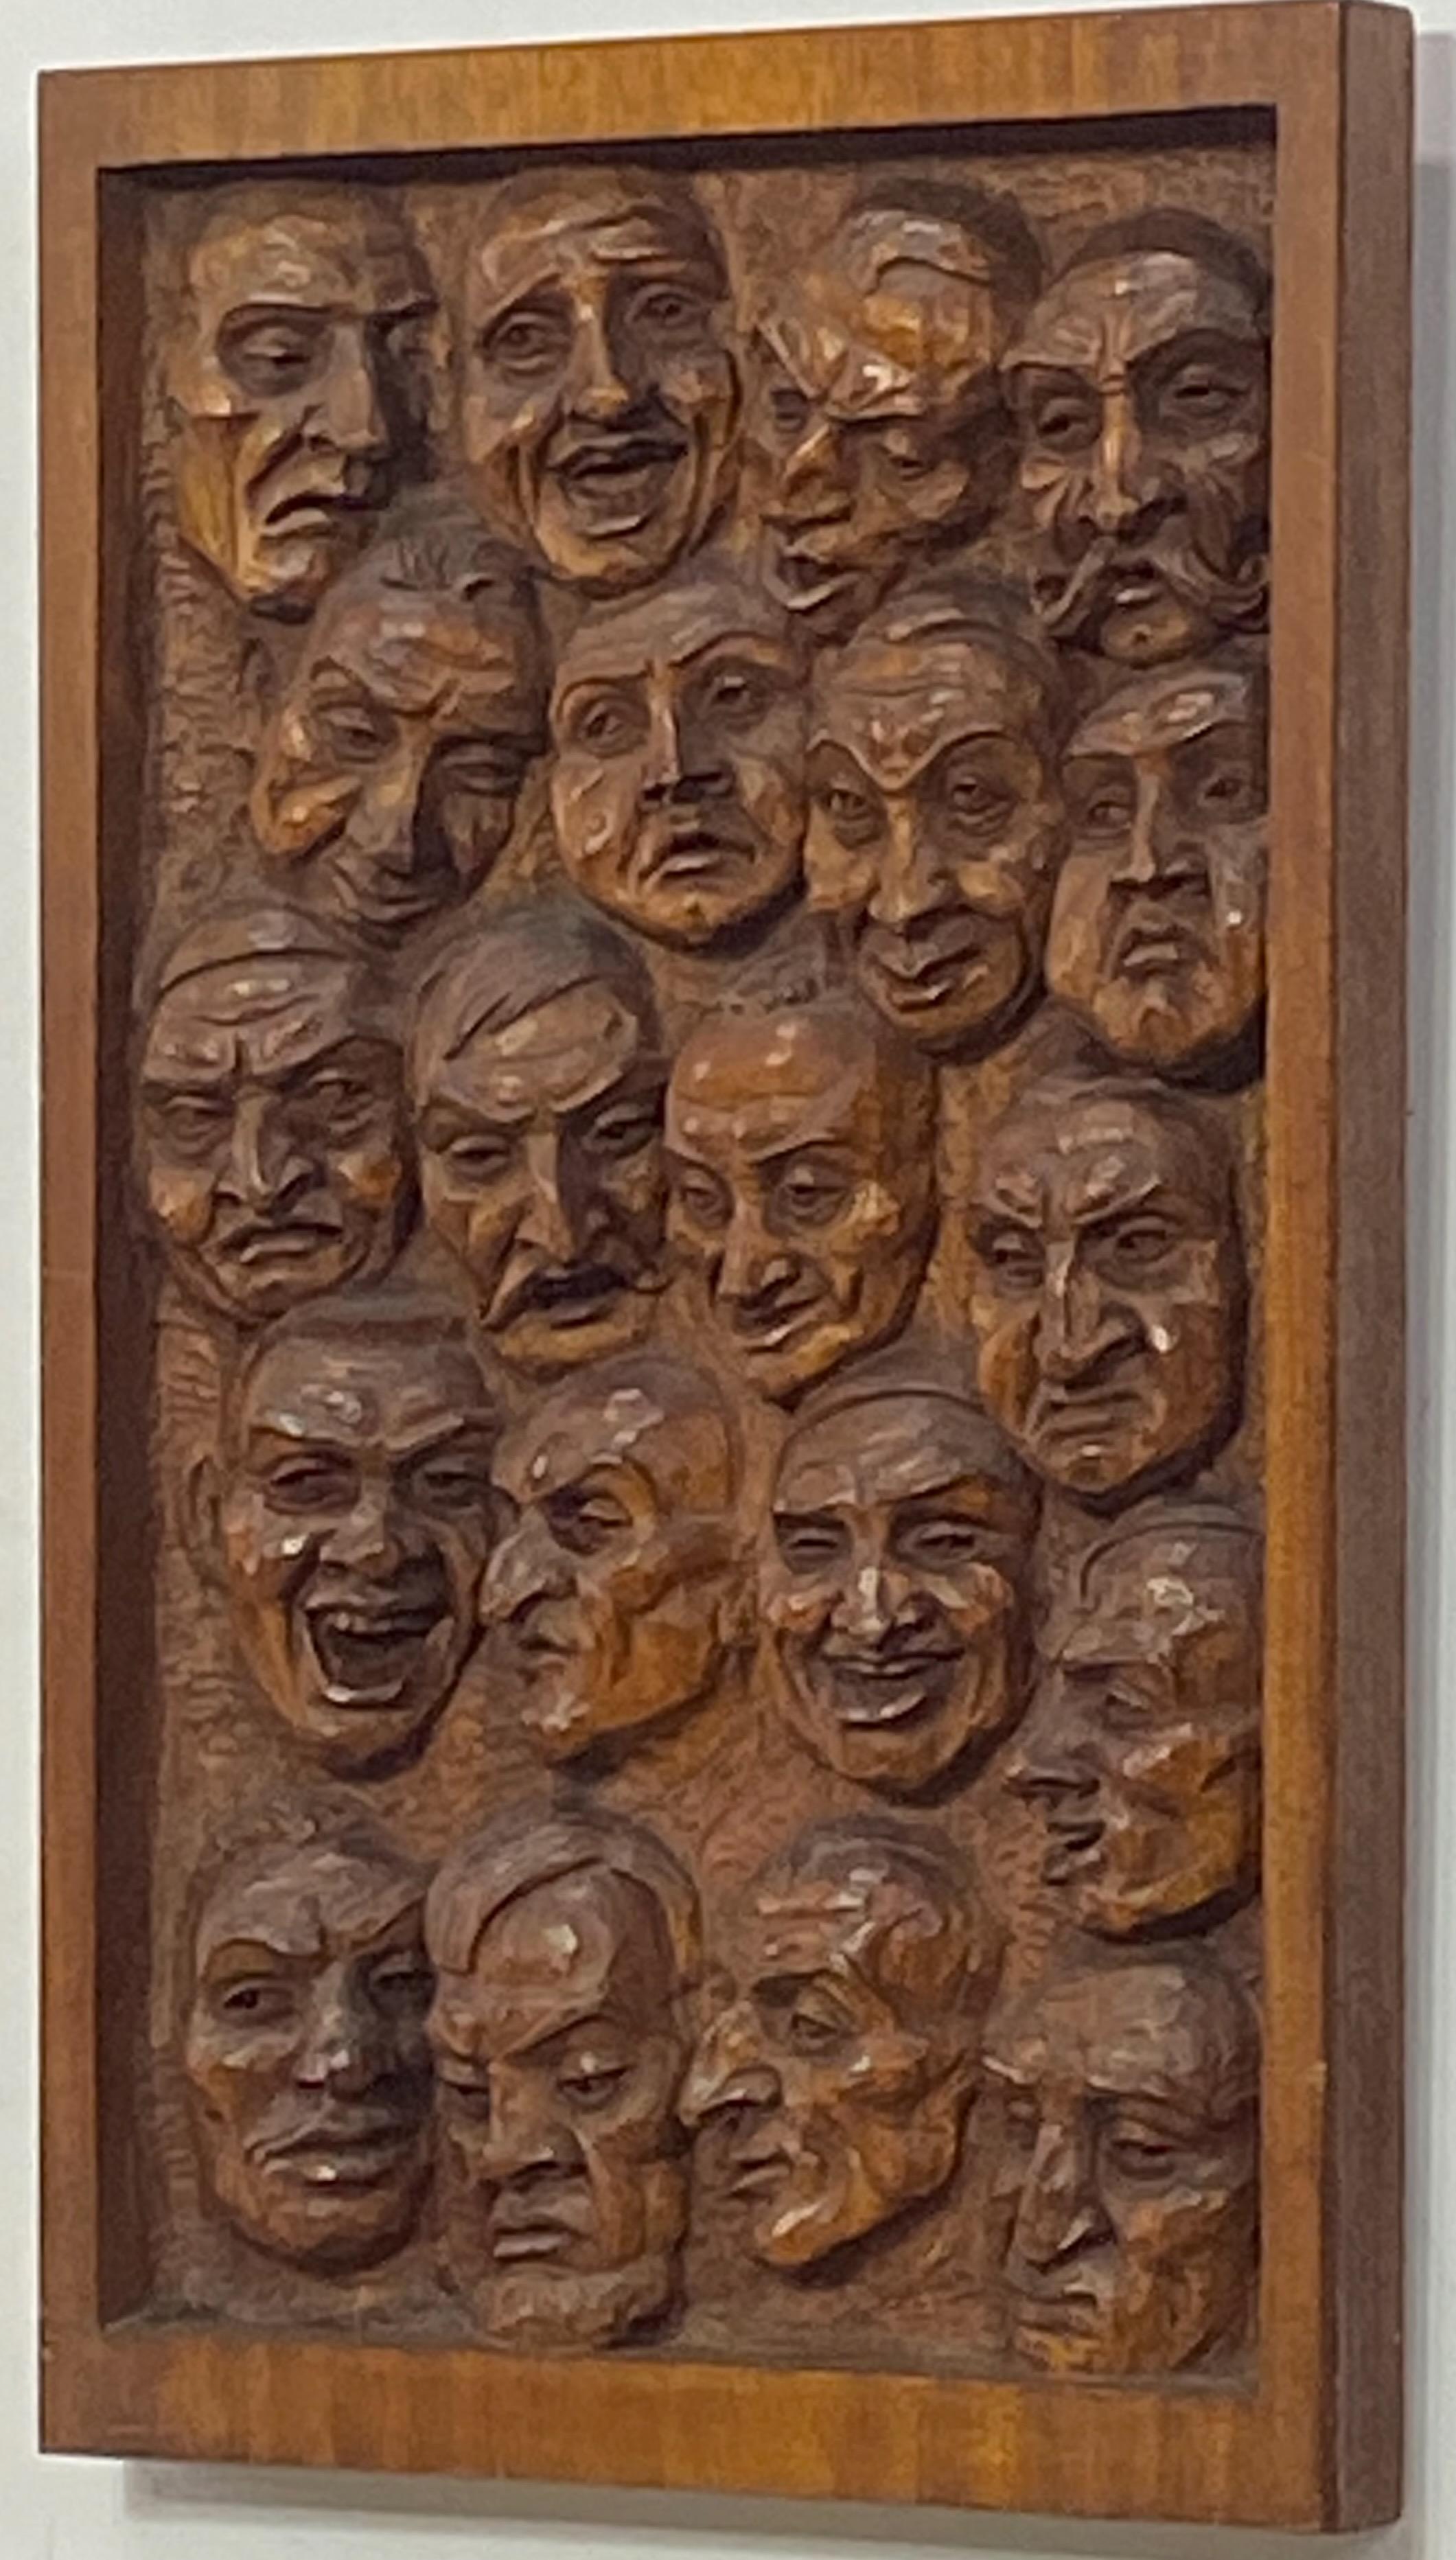 Carved Figural Mahogany Wall Sculpture by Swedish / American Artist Emil Janel, 1934